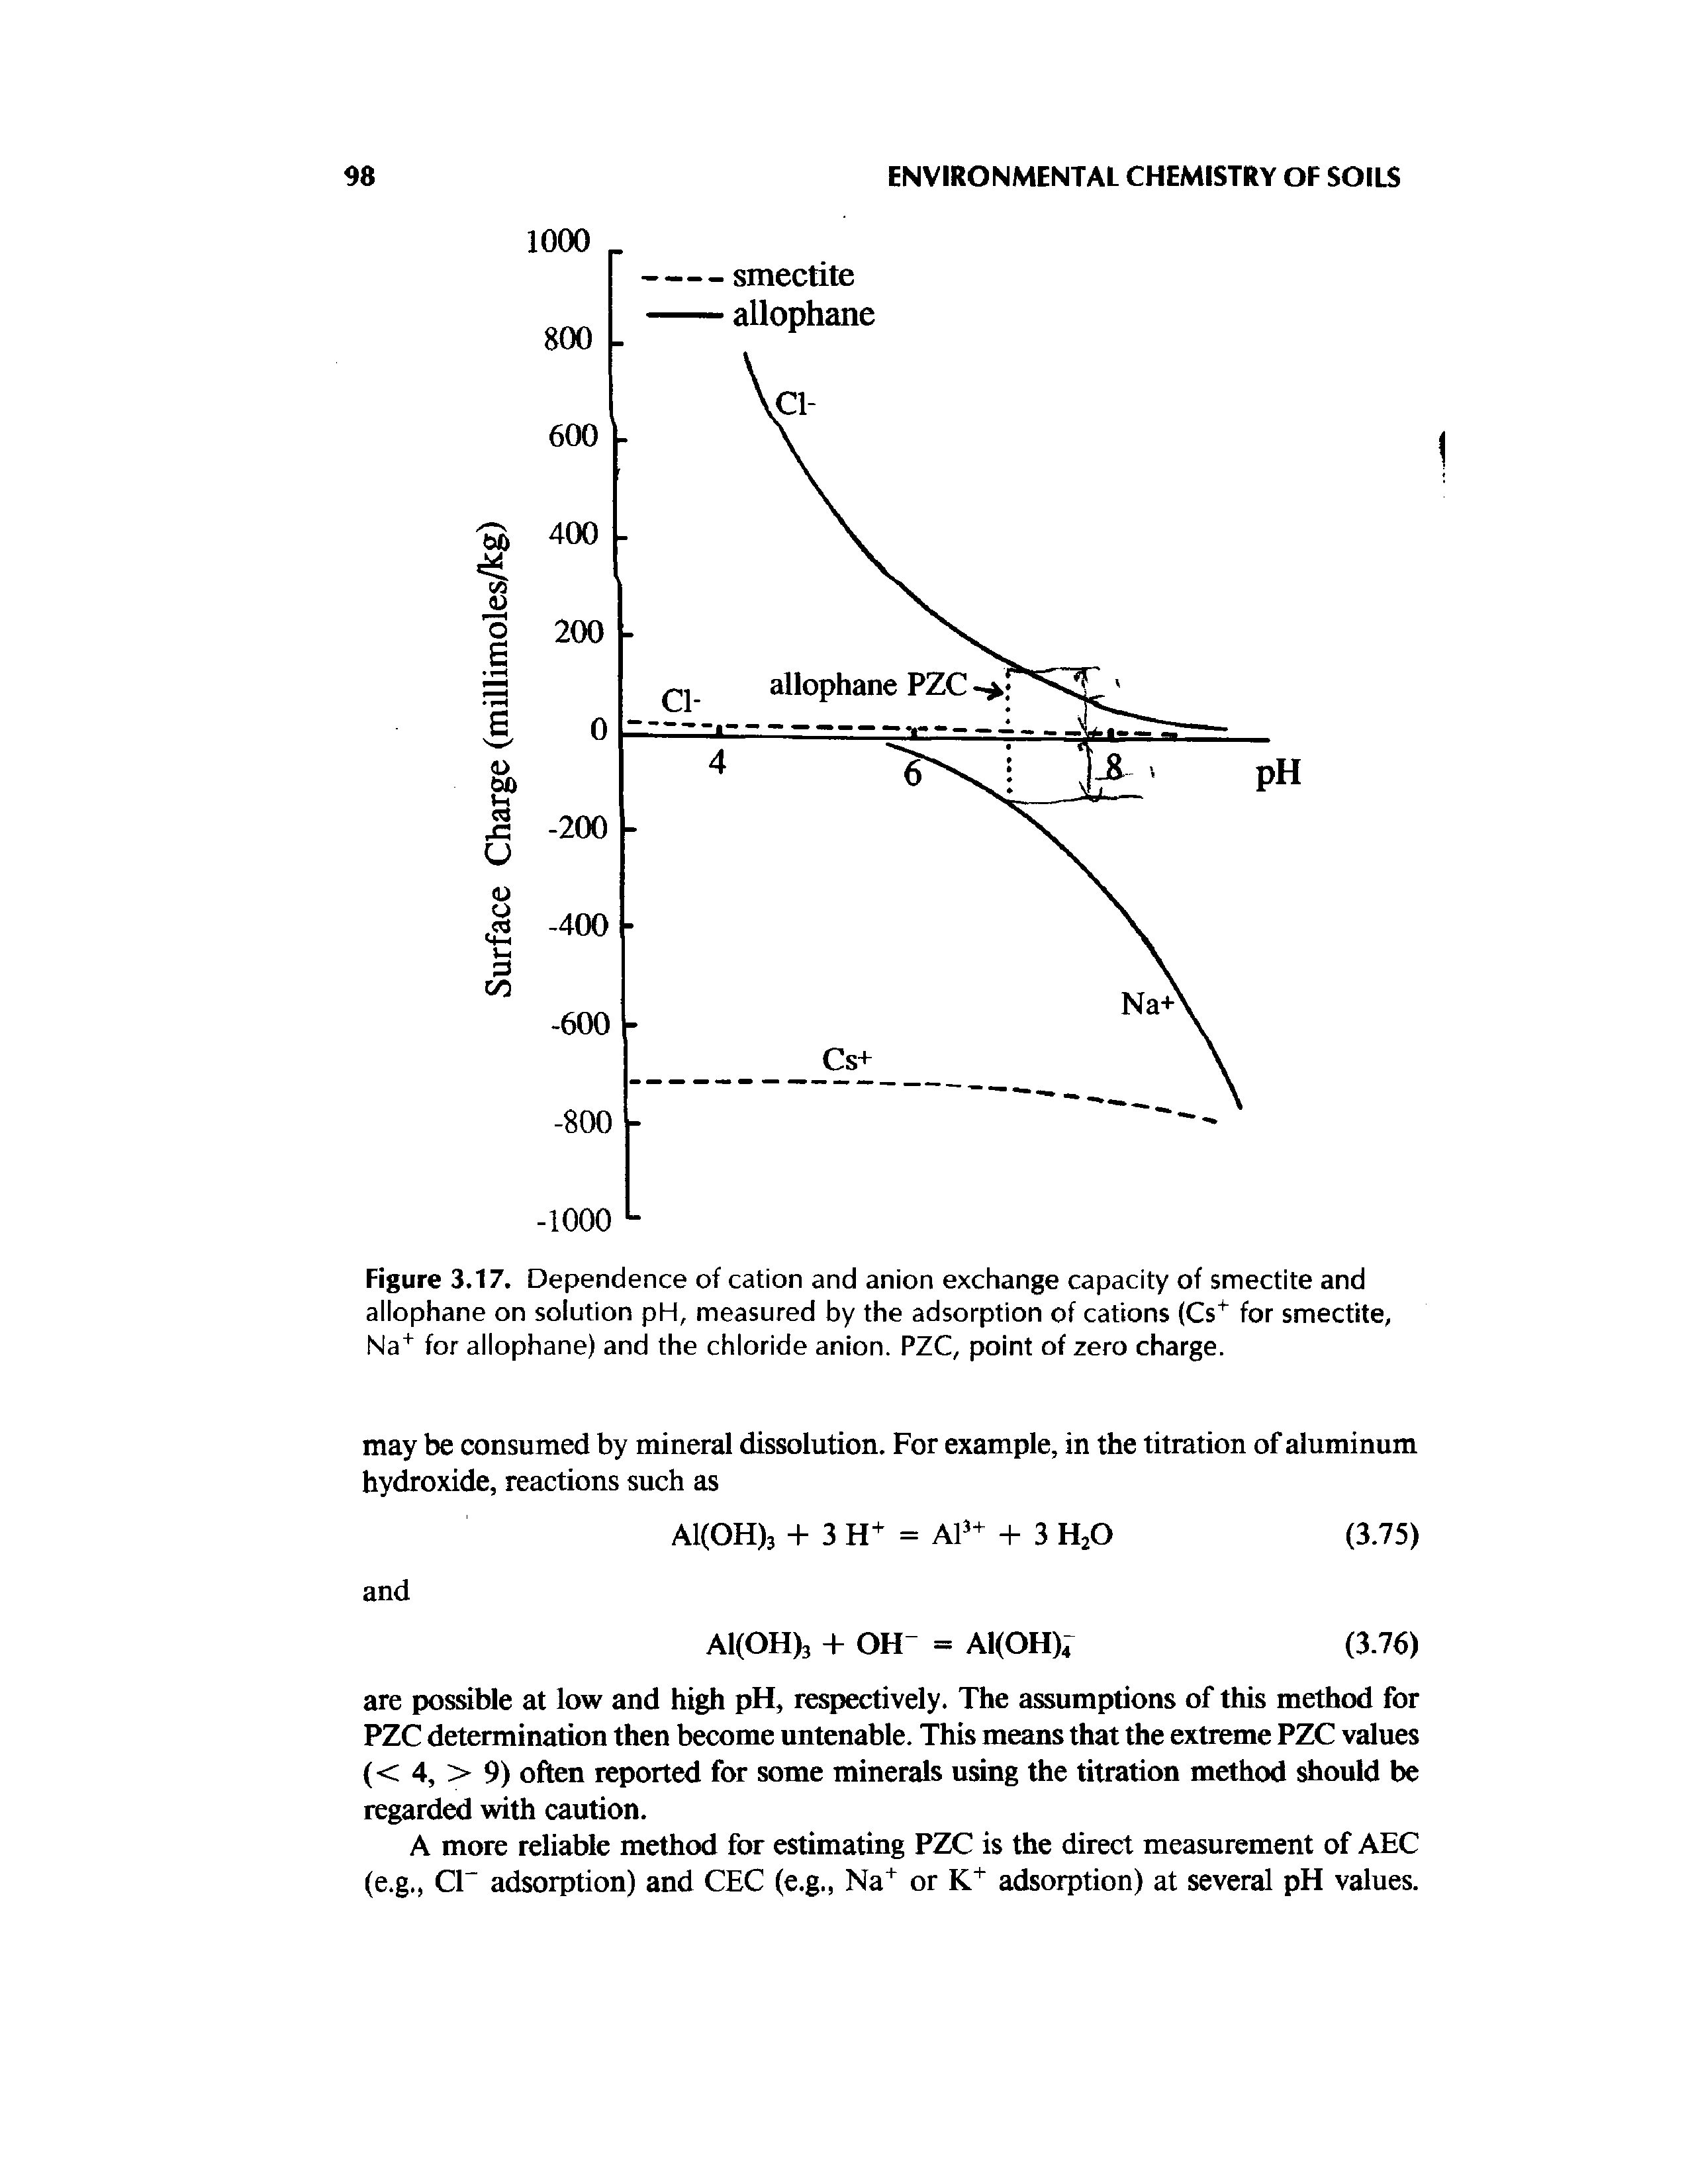 Figure 3.17. Dependence of cation and anion exchange capacity of smectite and allophane on solution pH, measured by the adsorption of cations (Cs for smectite, Na for allophane) and the chloride anion. PZC, point of zero charge.